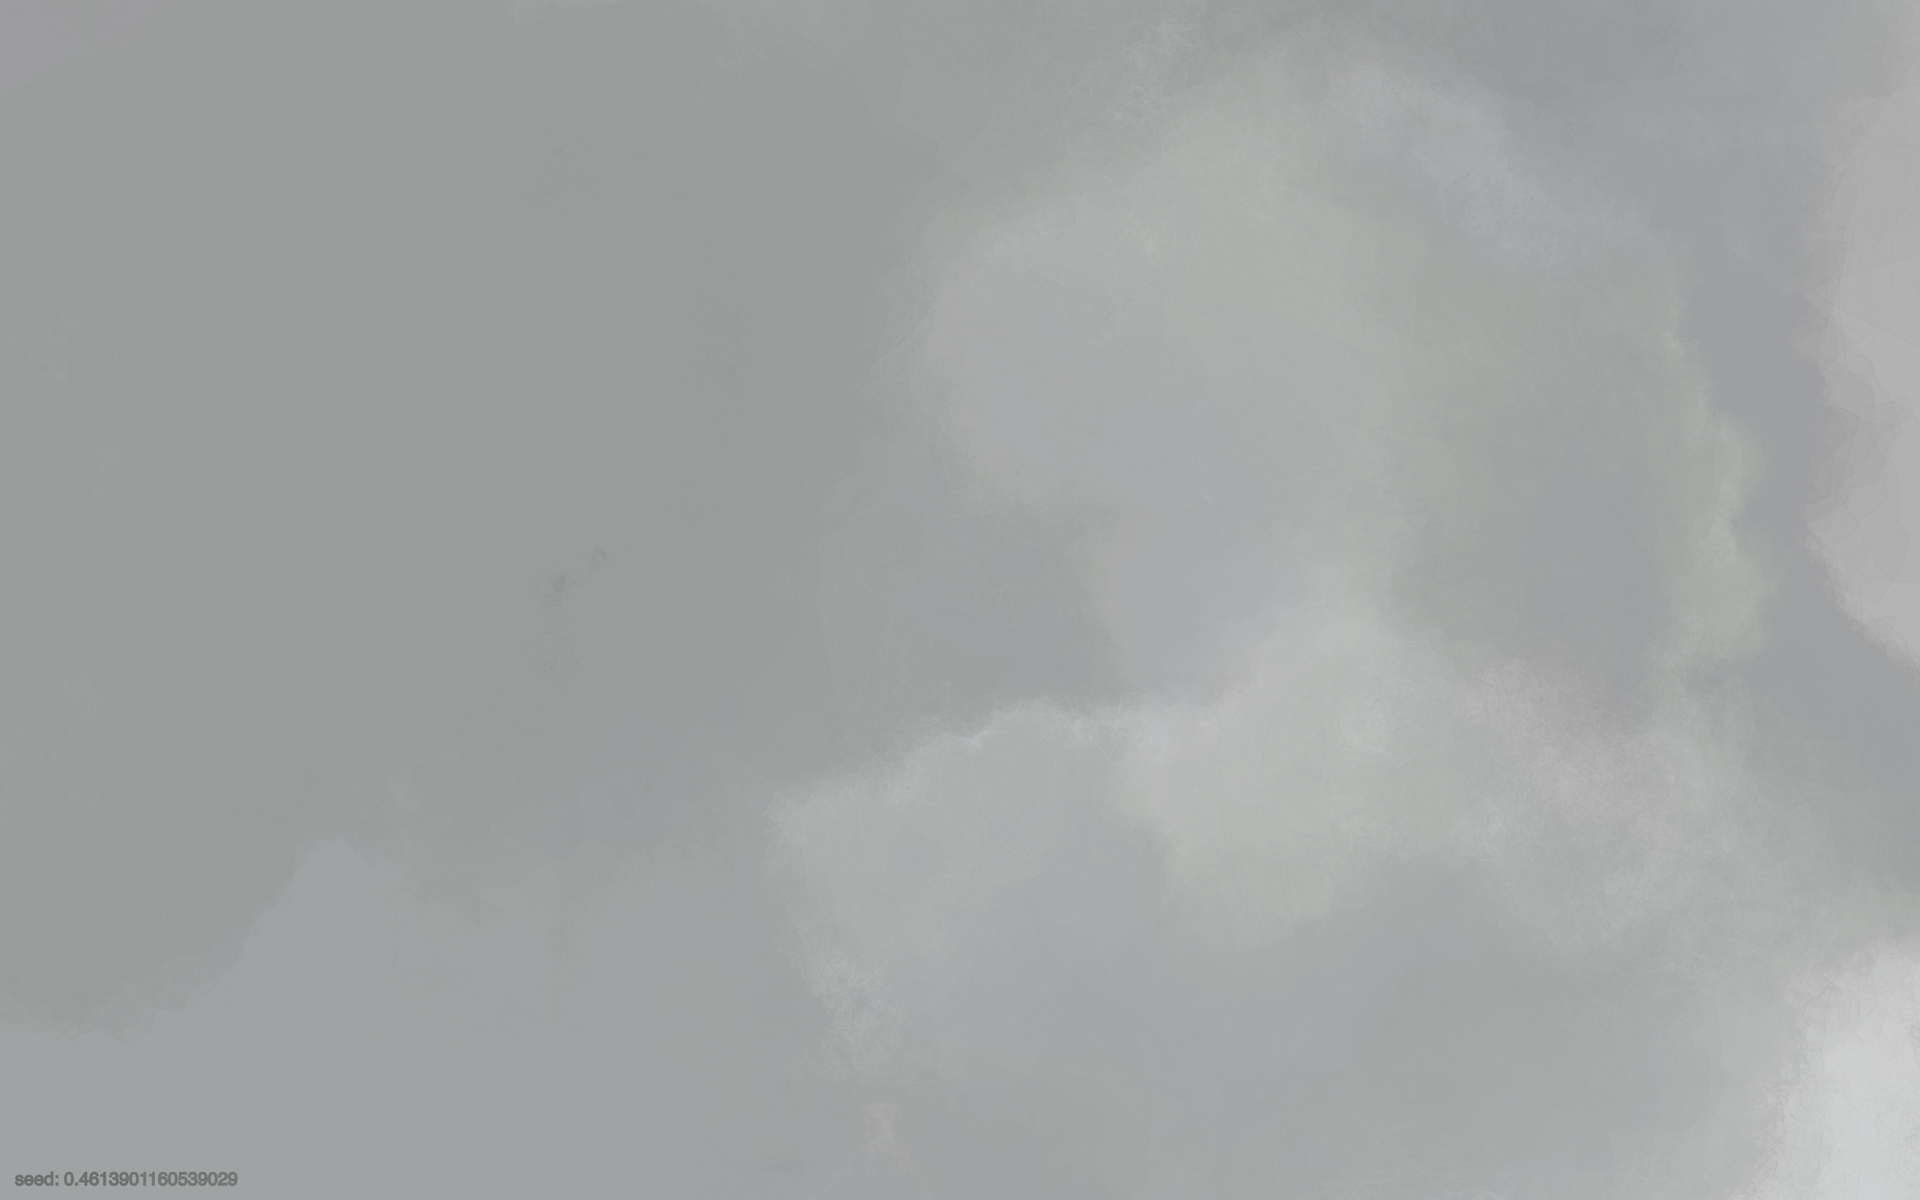 An image generated with p5js that I think looks like clouds.